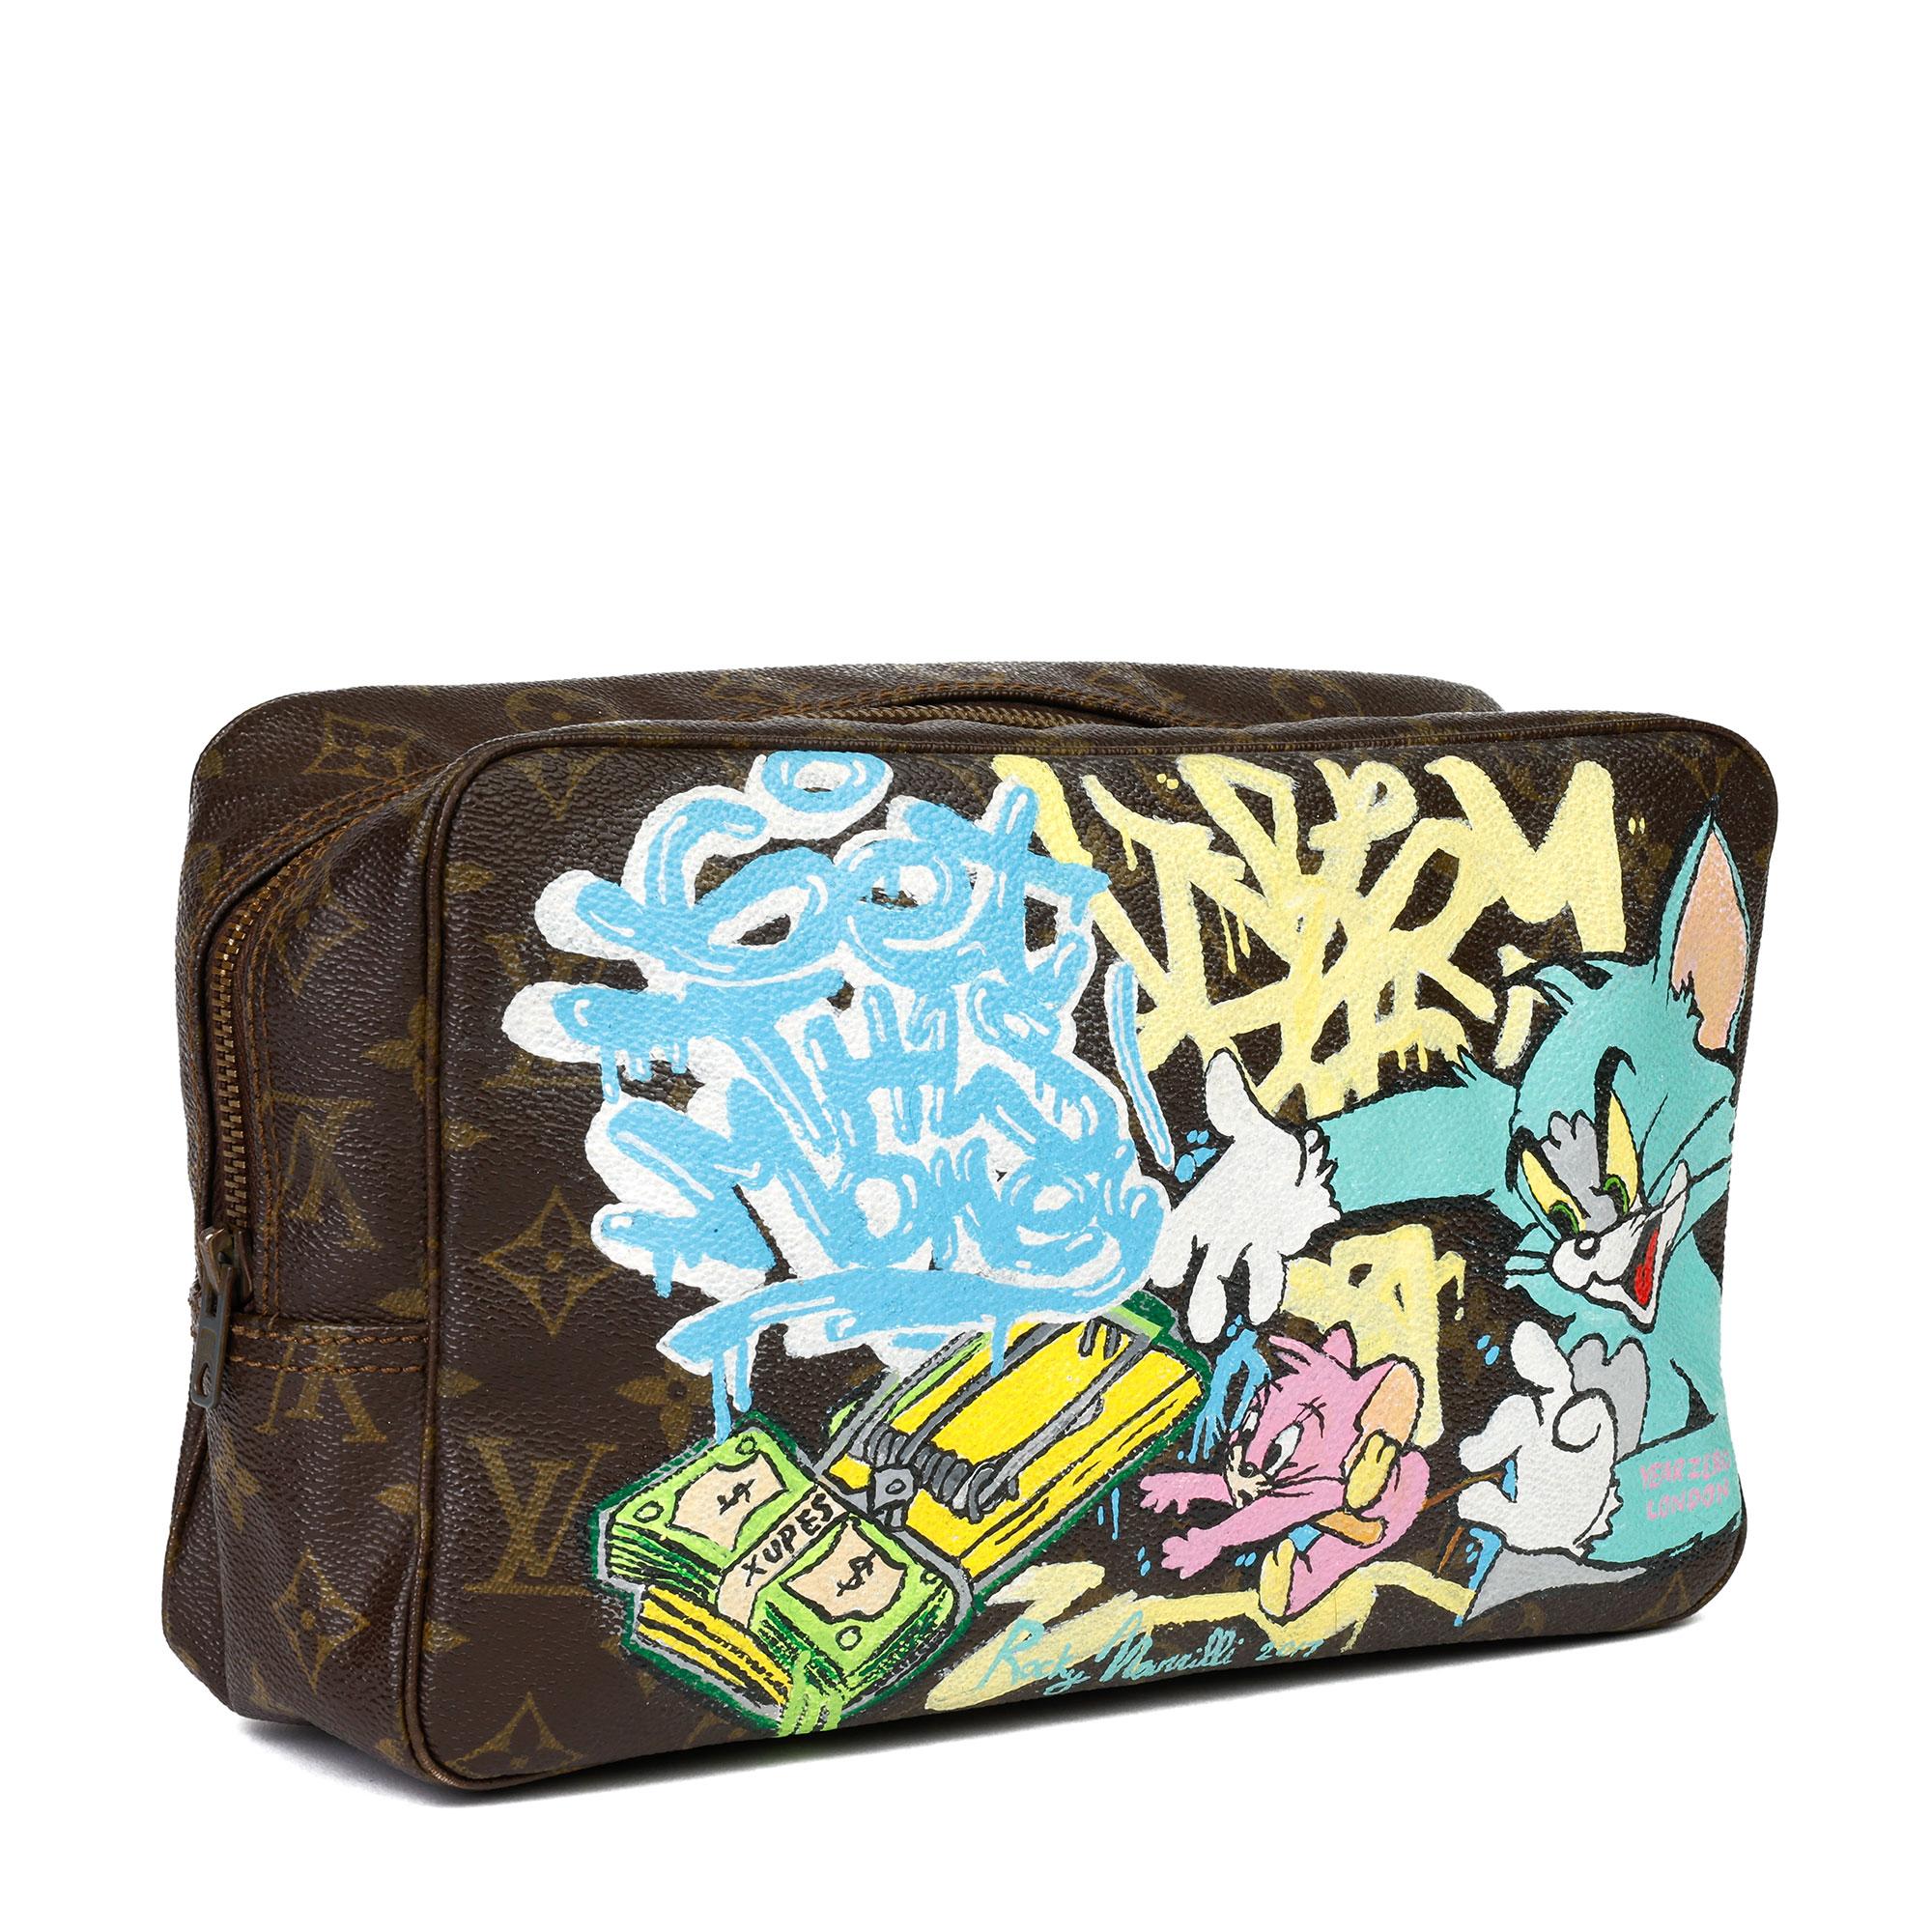 LOUIS VUITTON
Hand-painted 'Get This Money' X Year Zero London Toiletry Pouch

Xupes Reference: CB327
Serial Number: 833
Age (Circa): 1983
Authenticity Details: Date Stamp (Made in France)
Gender: Ladies
Type: Travel, Accessory

Colour: Multi